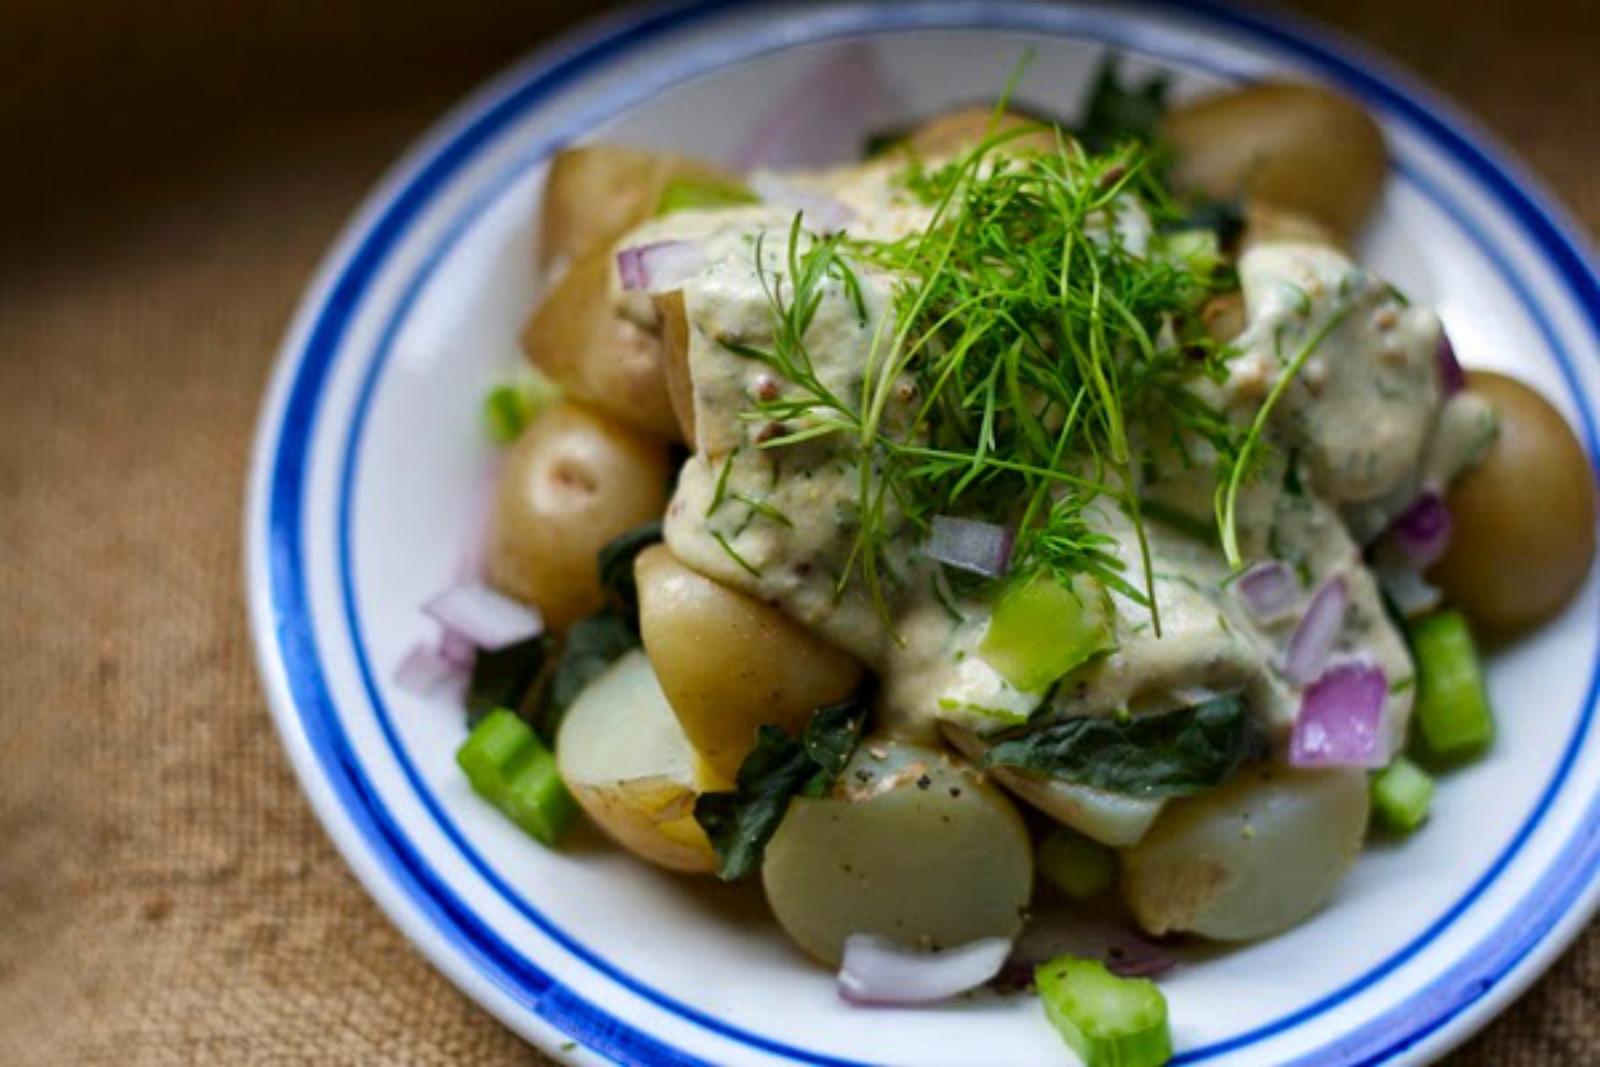 Perfectly Comforting Potato Recipes Everyone at the Table Will Love!